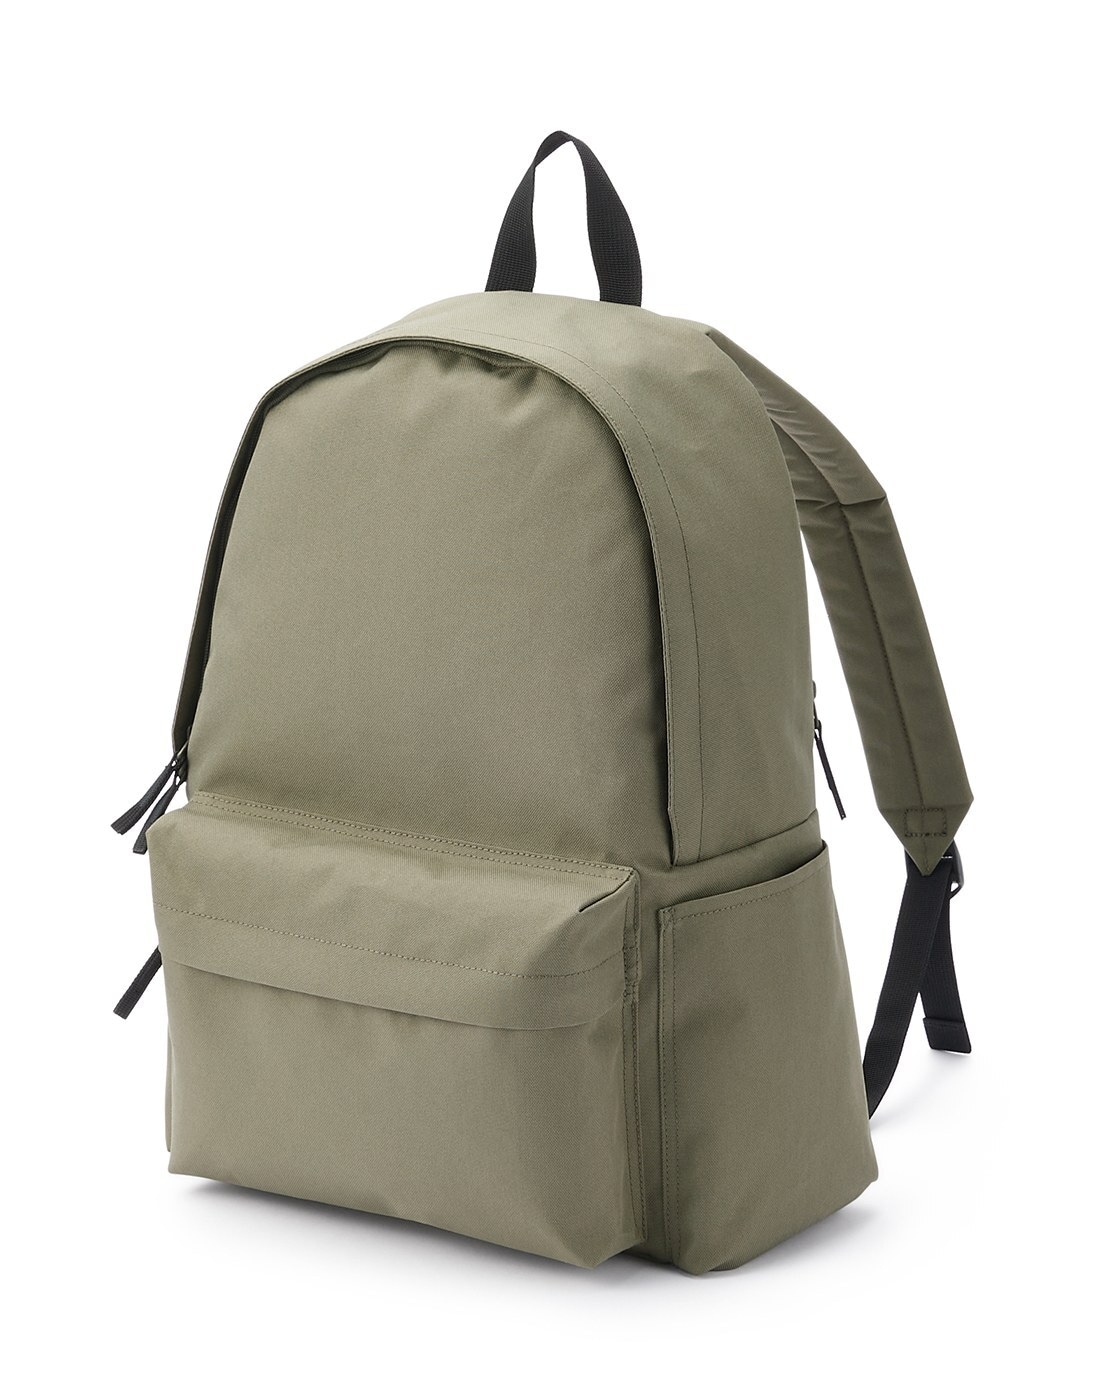 Buy CAT 5 Ltrs Olive Green Backpack at Best Price @ Tata CLiQ